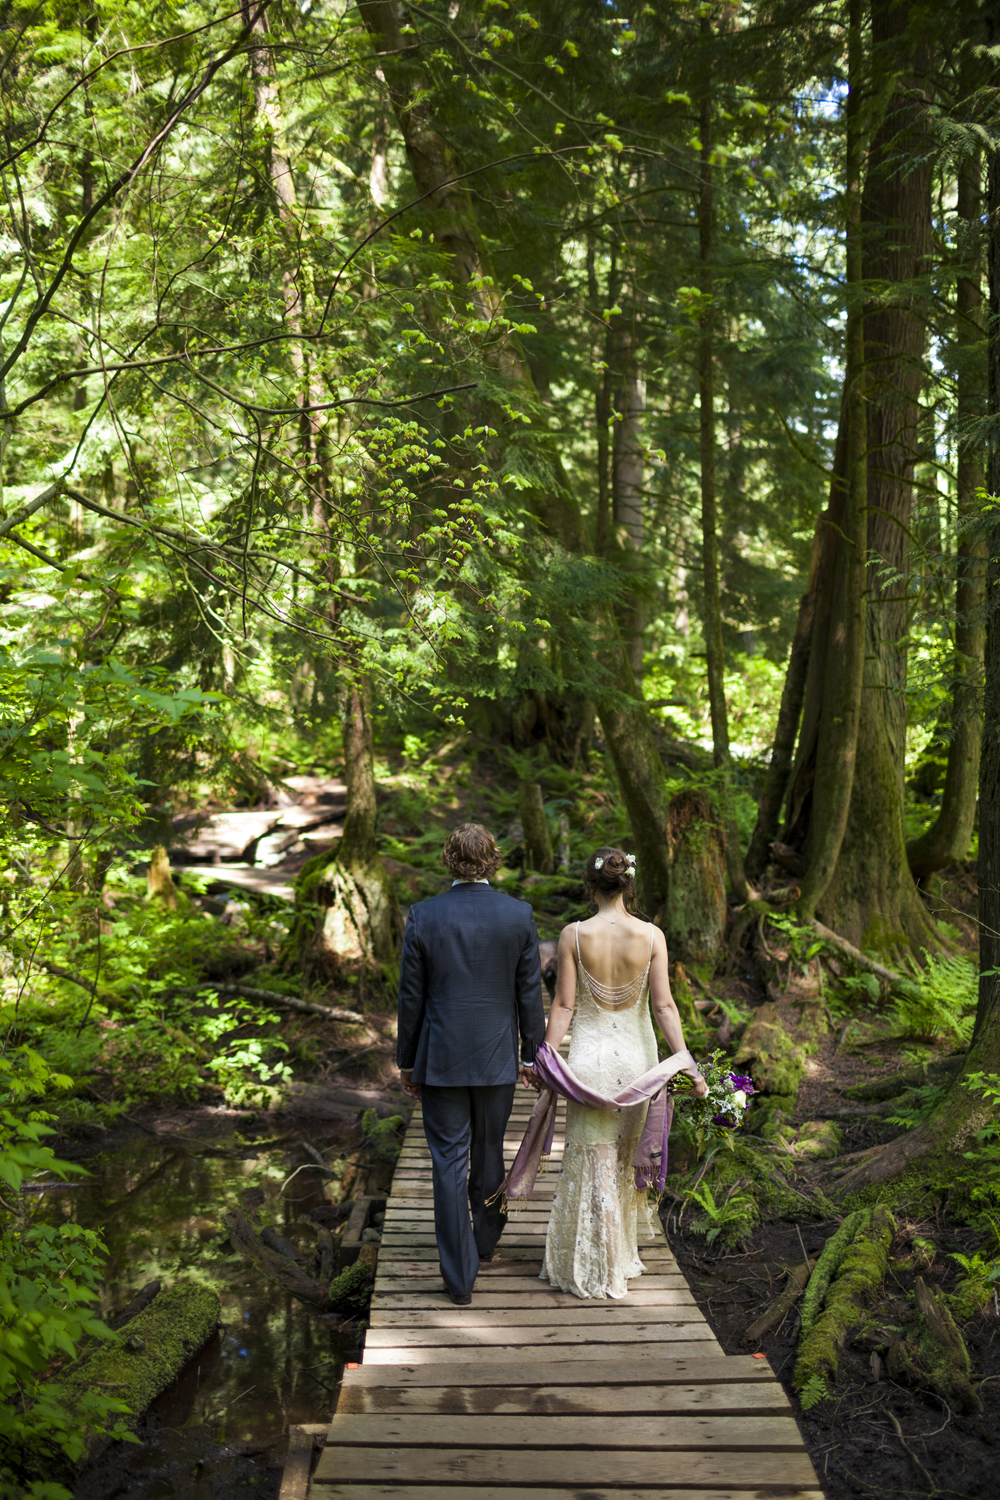 Bride and groom in the woods